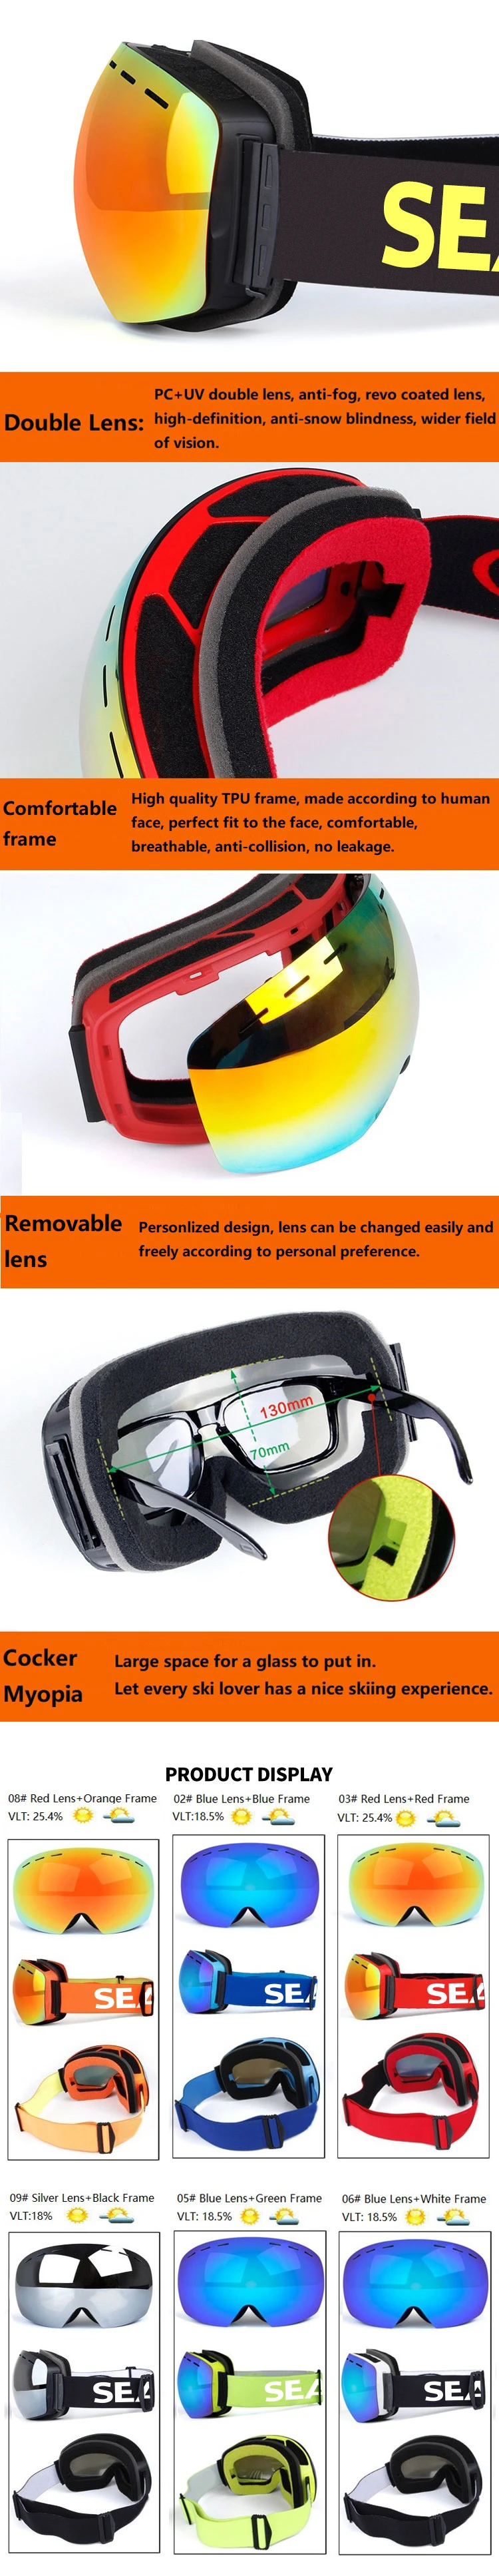 Fire Outdoor Ski Goggles Snowboard Ski Goggles for Kinds of Color to Choose